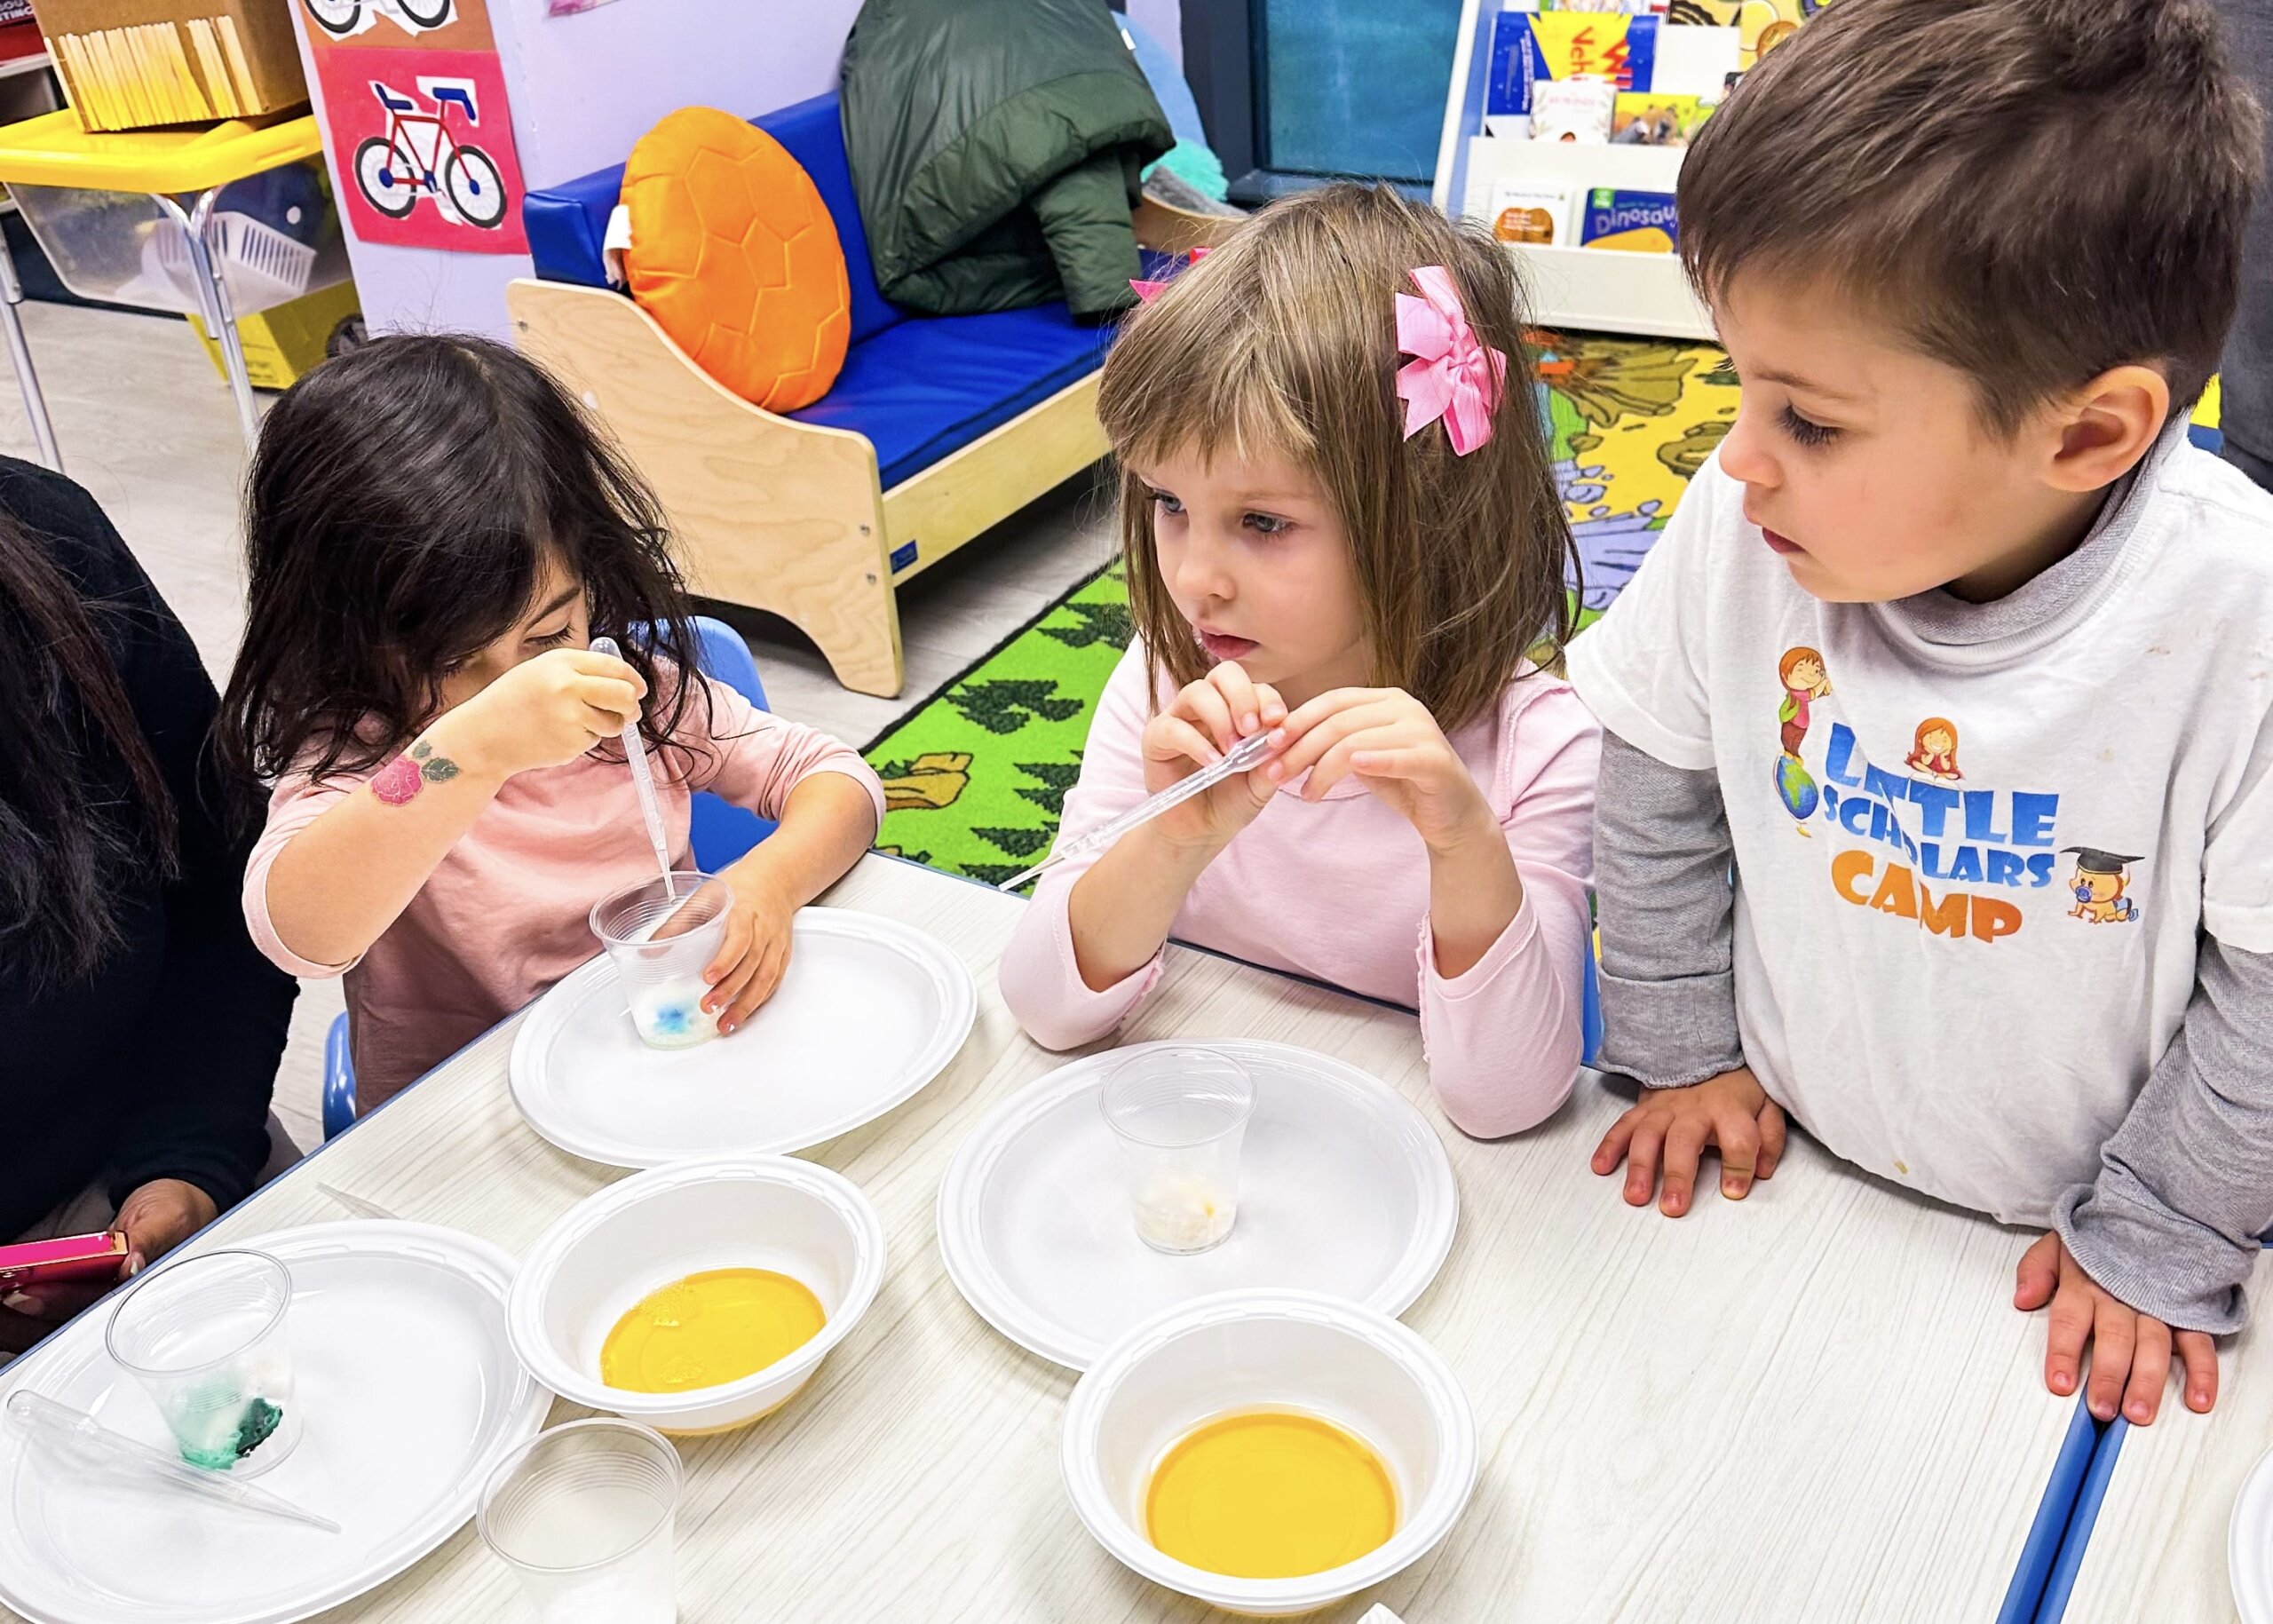 Kids engaged in a DIY science experiment mixing colors in a preschool classroom setting